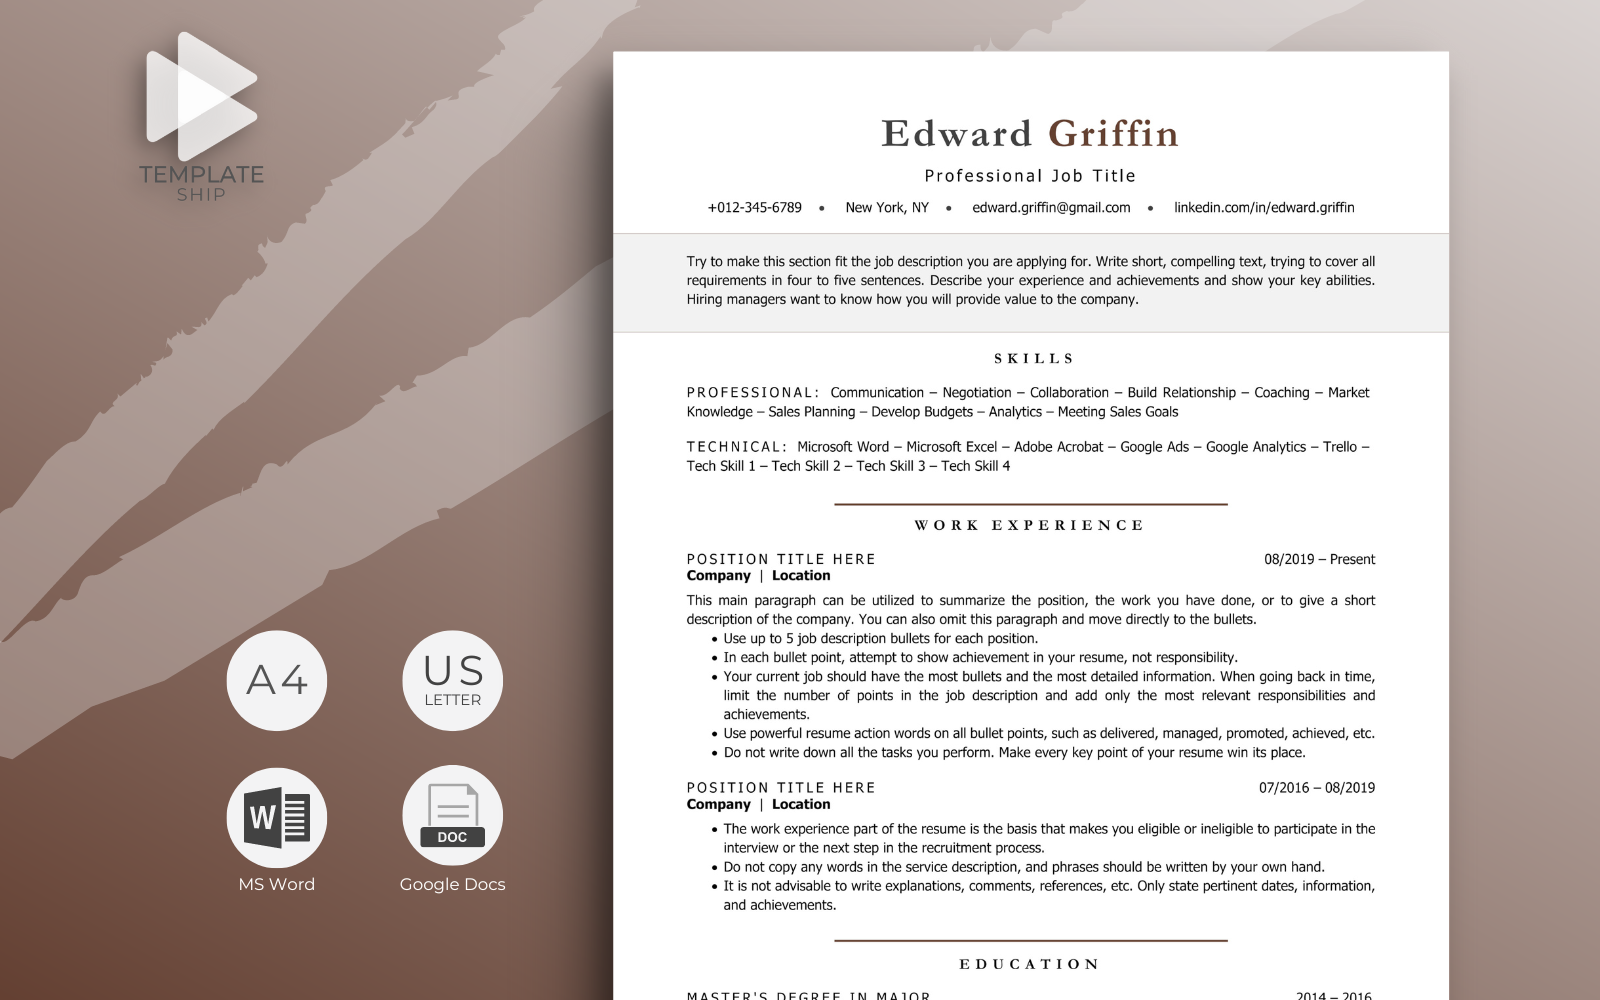 Professional Resume Template Edward Griffin